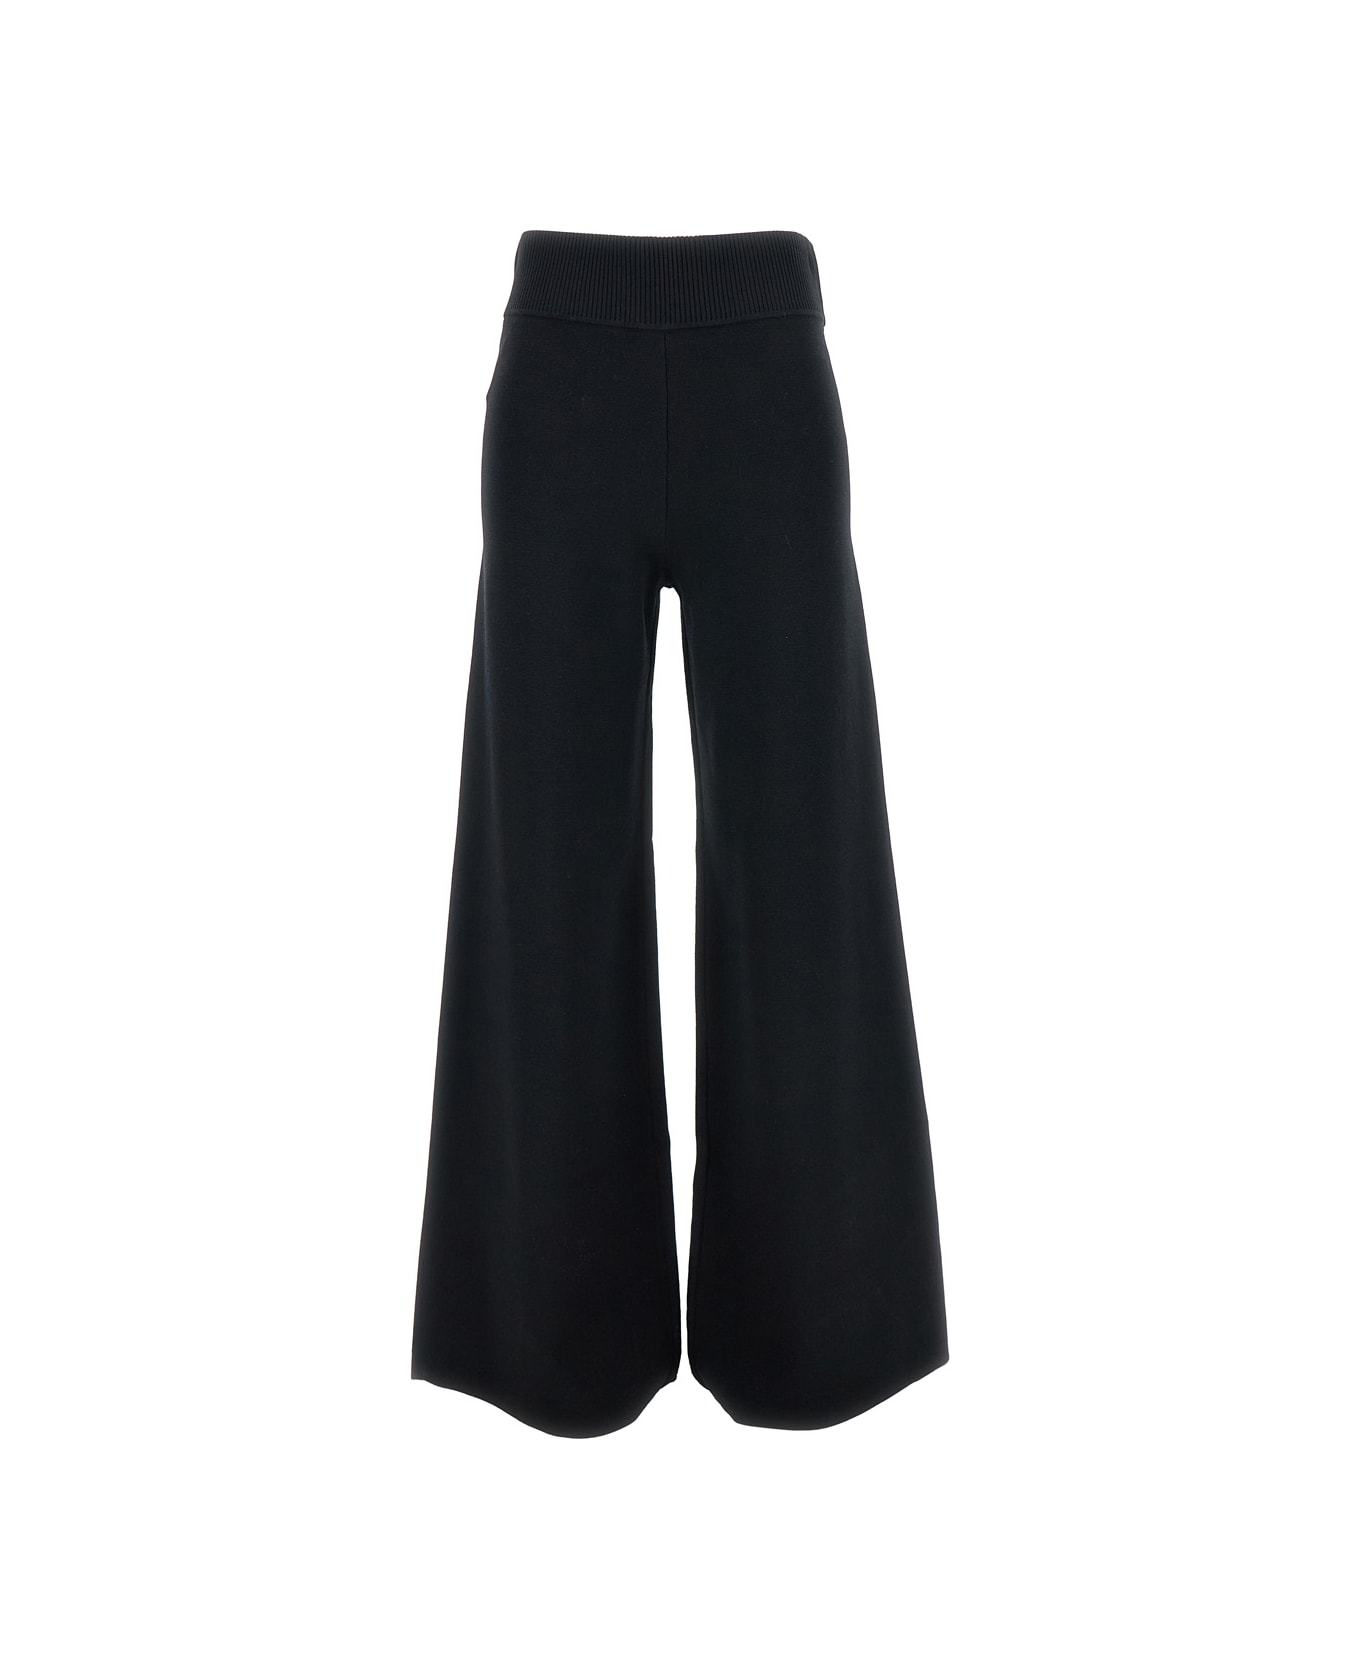 Parosh Black Wide Pants With Elastic Waistband In Viscose Blend Woman - Black